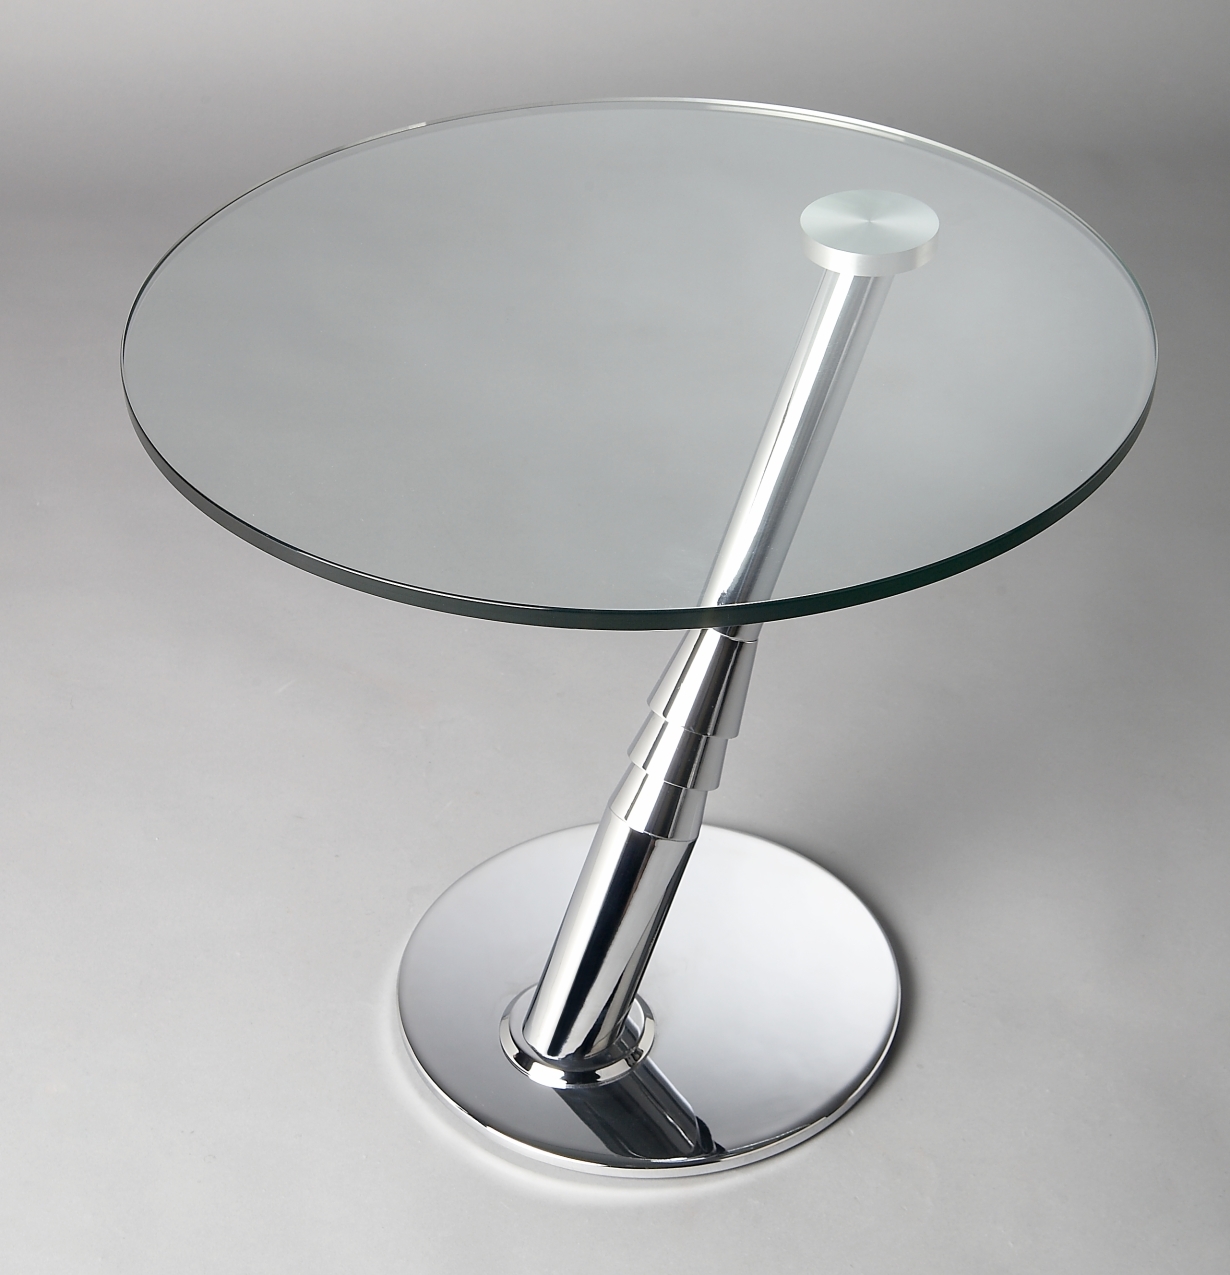 Round glass coffee table metal base